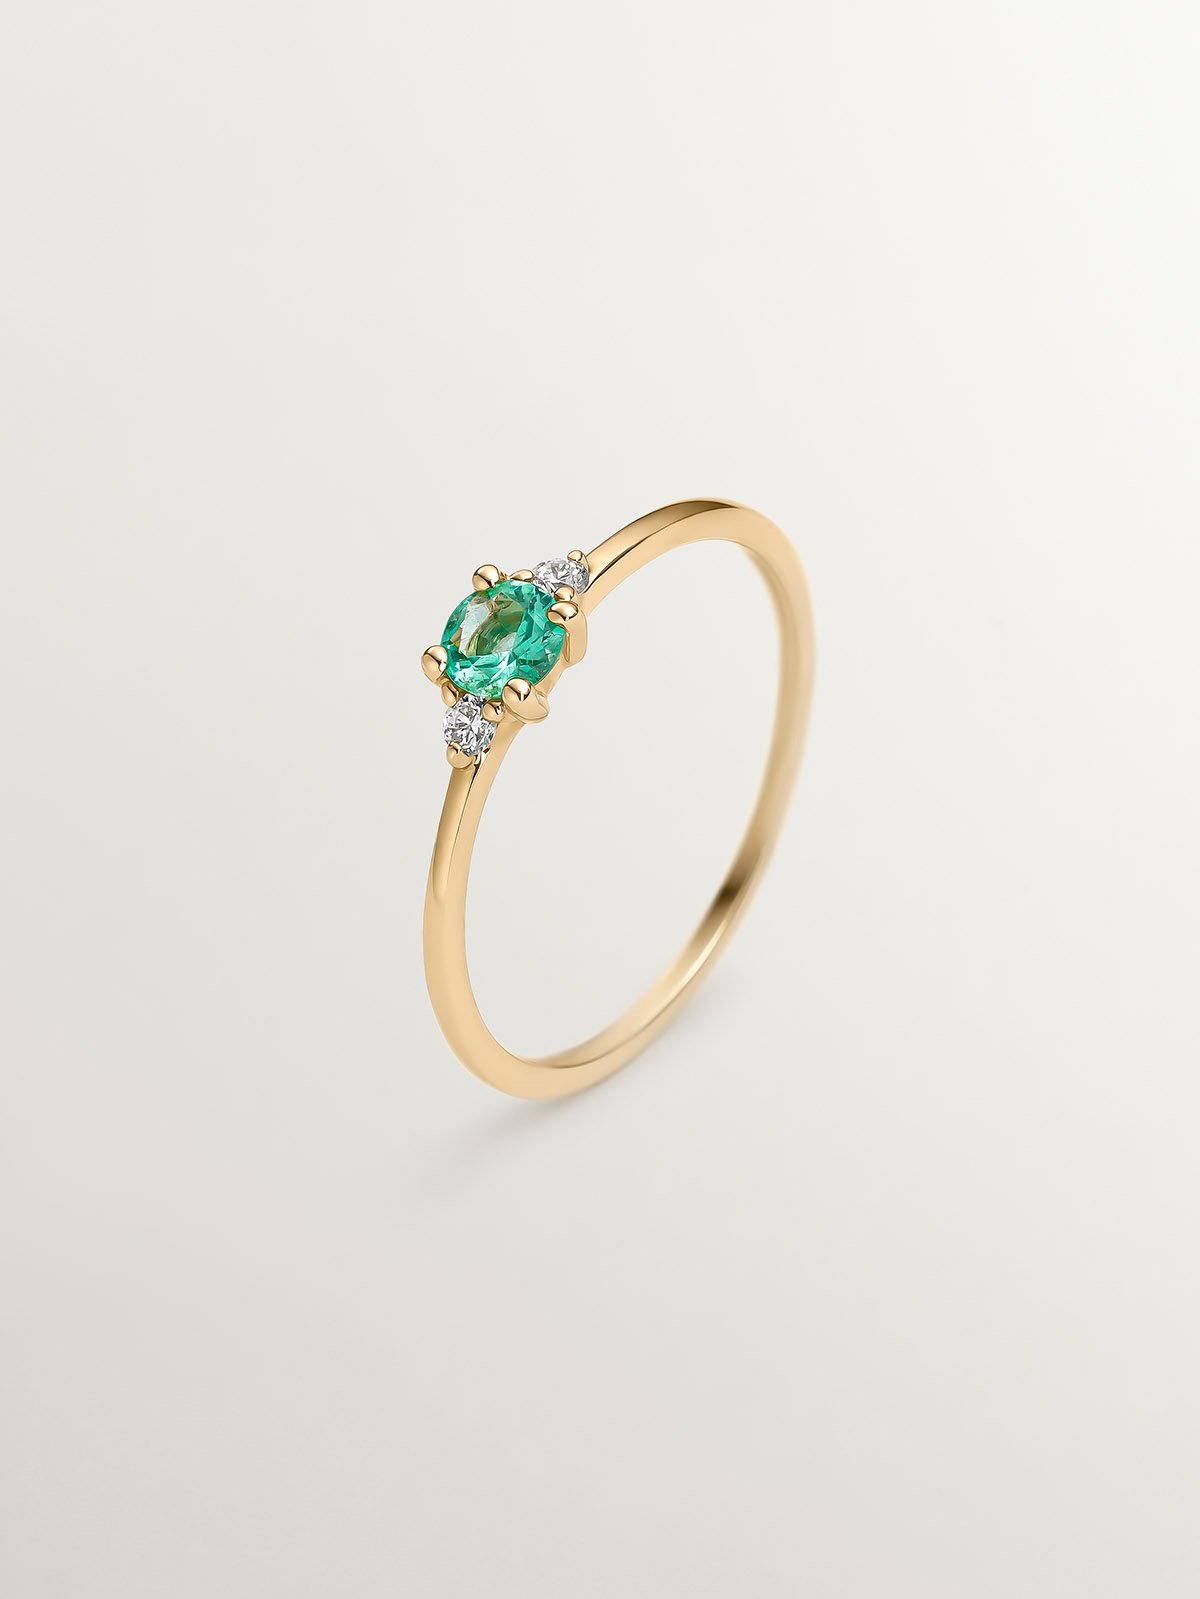 9K Yellow Gold Trilogy Ring with Emerald and Diamonds